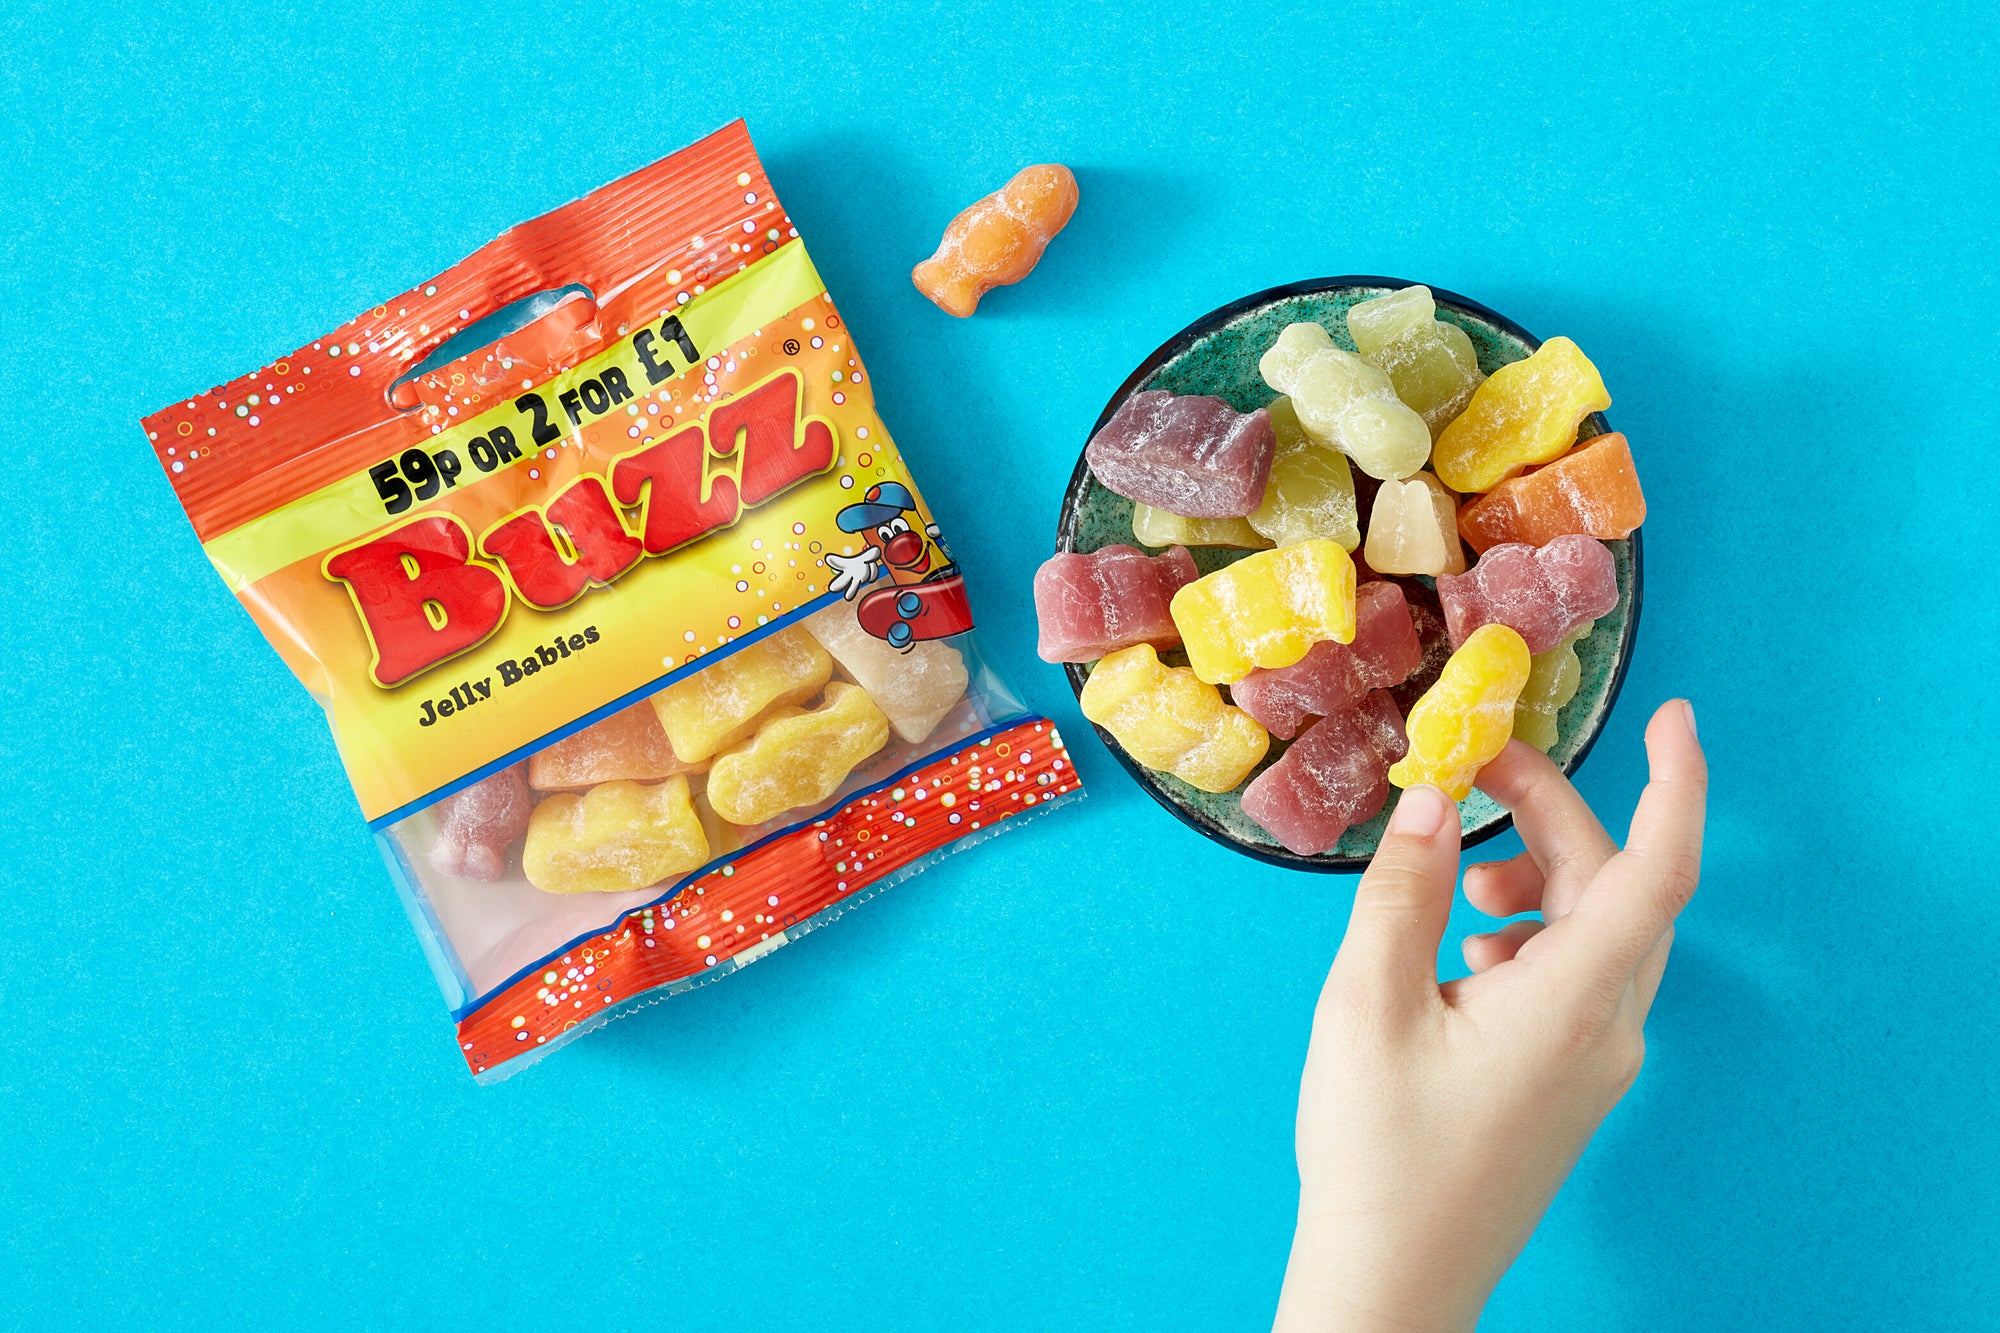 Buzz Sweets Jelly Babies | Kids Bags